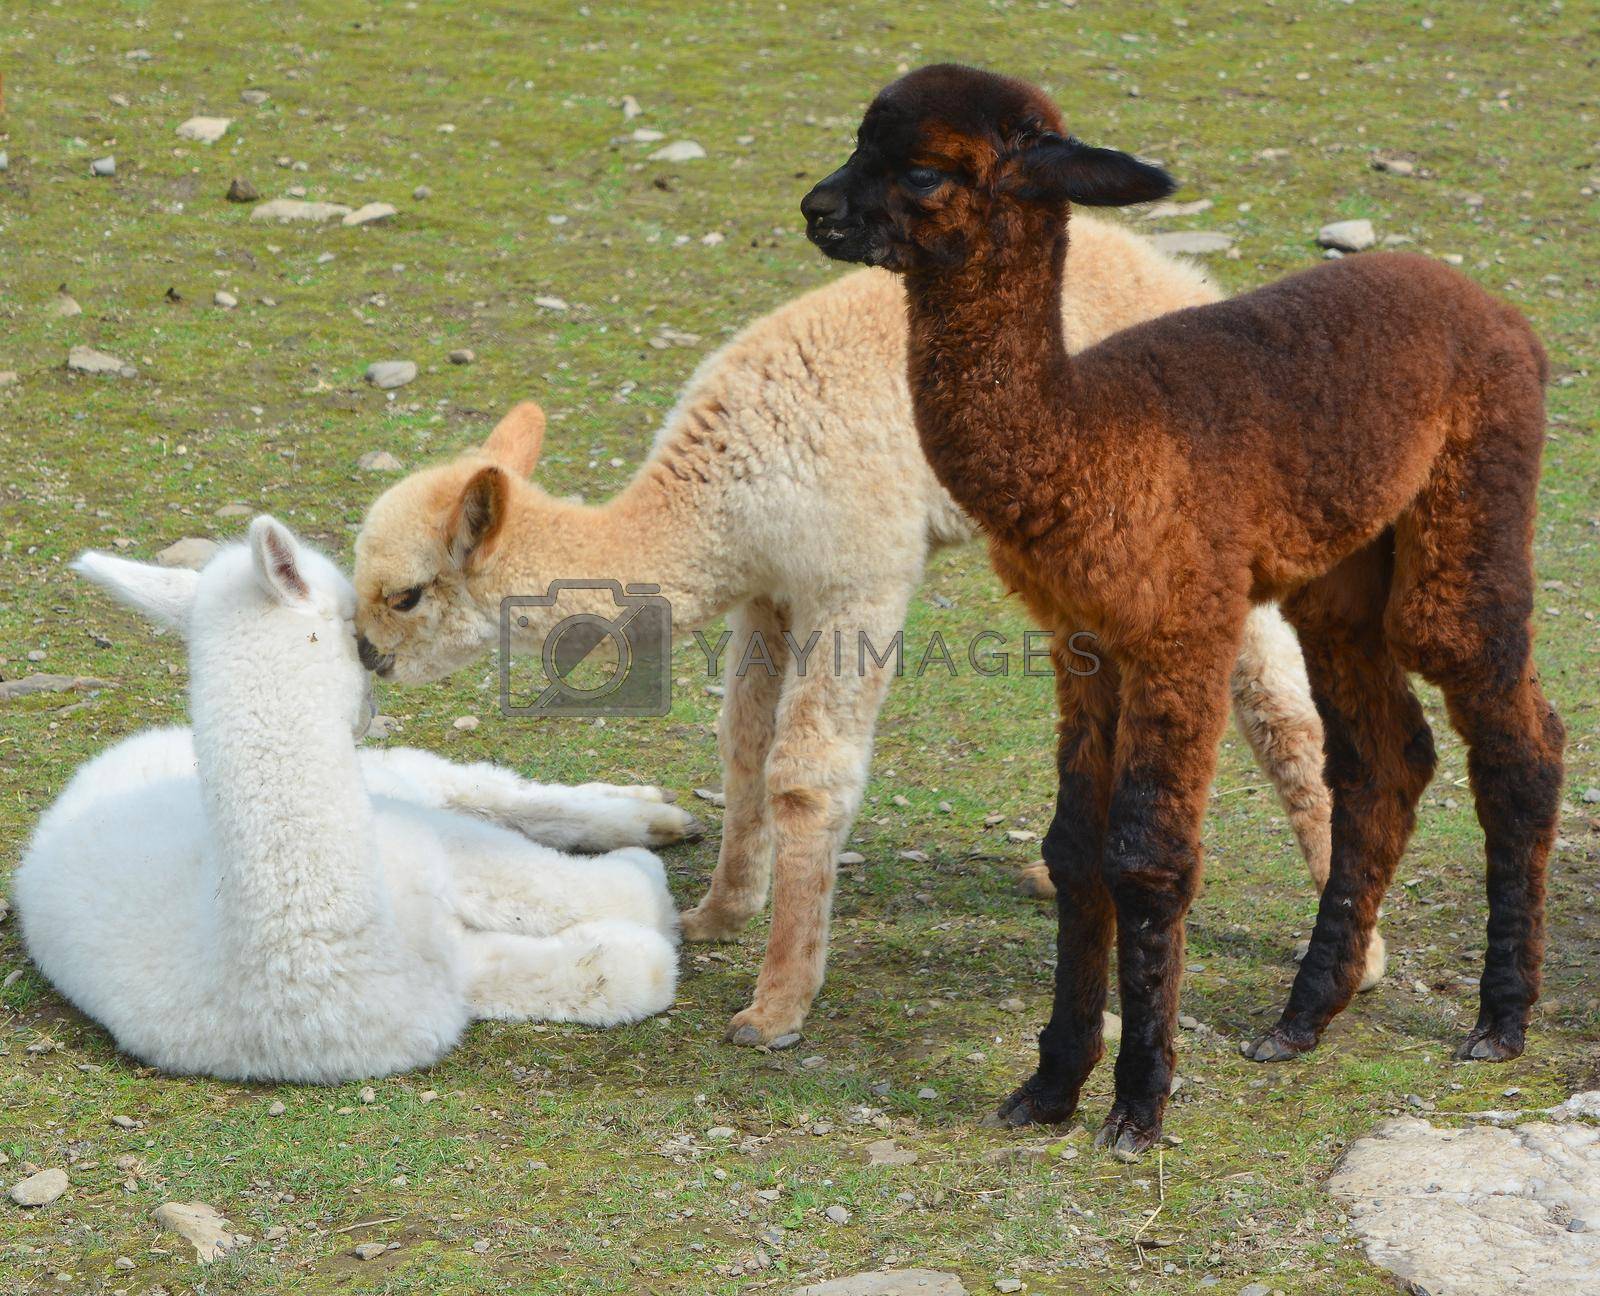 Royalty free image of Alpaca is a domesticated species of South American camelid. by meunierd